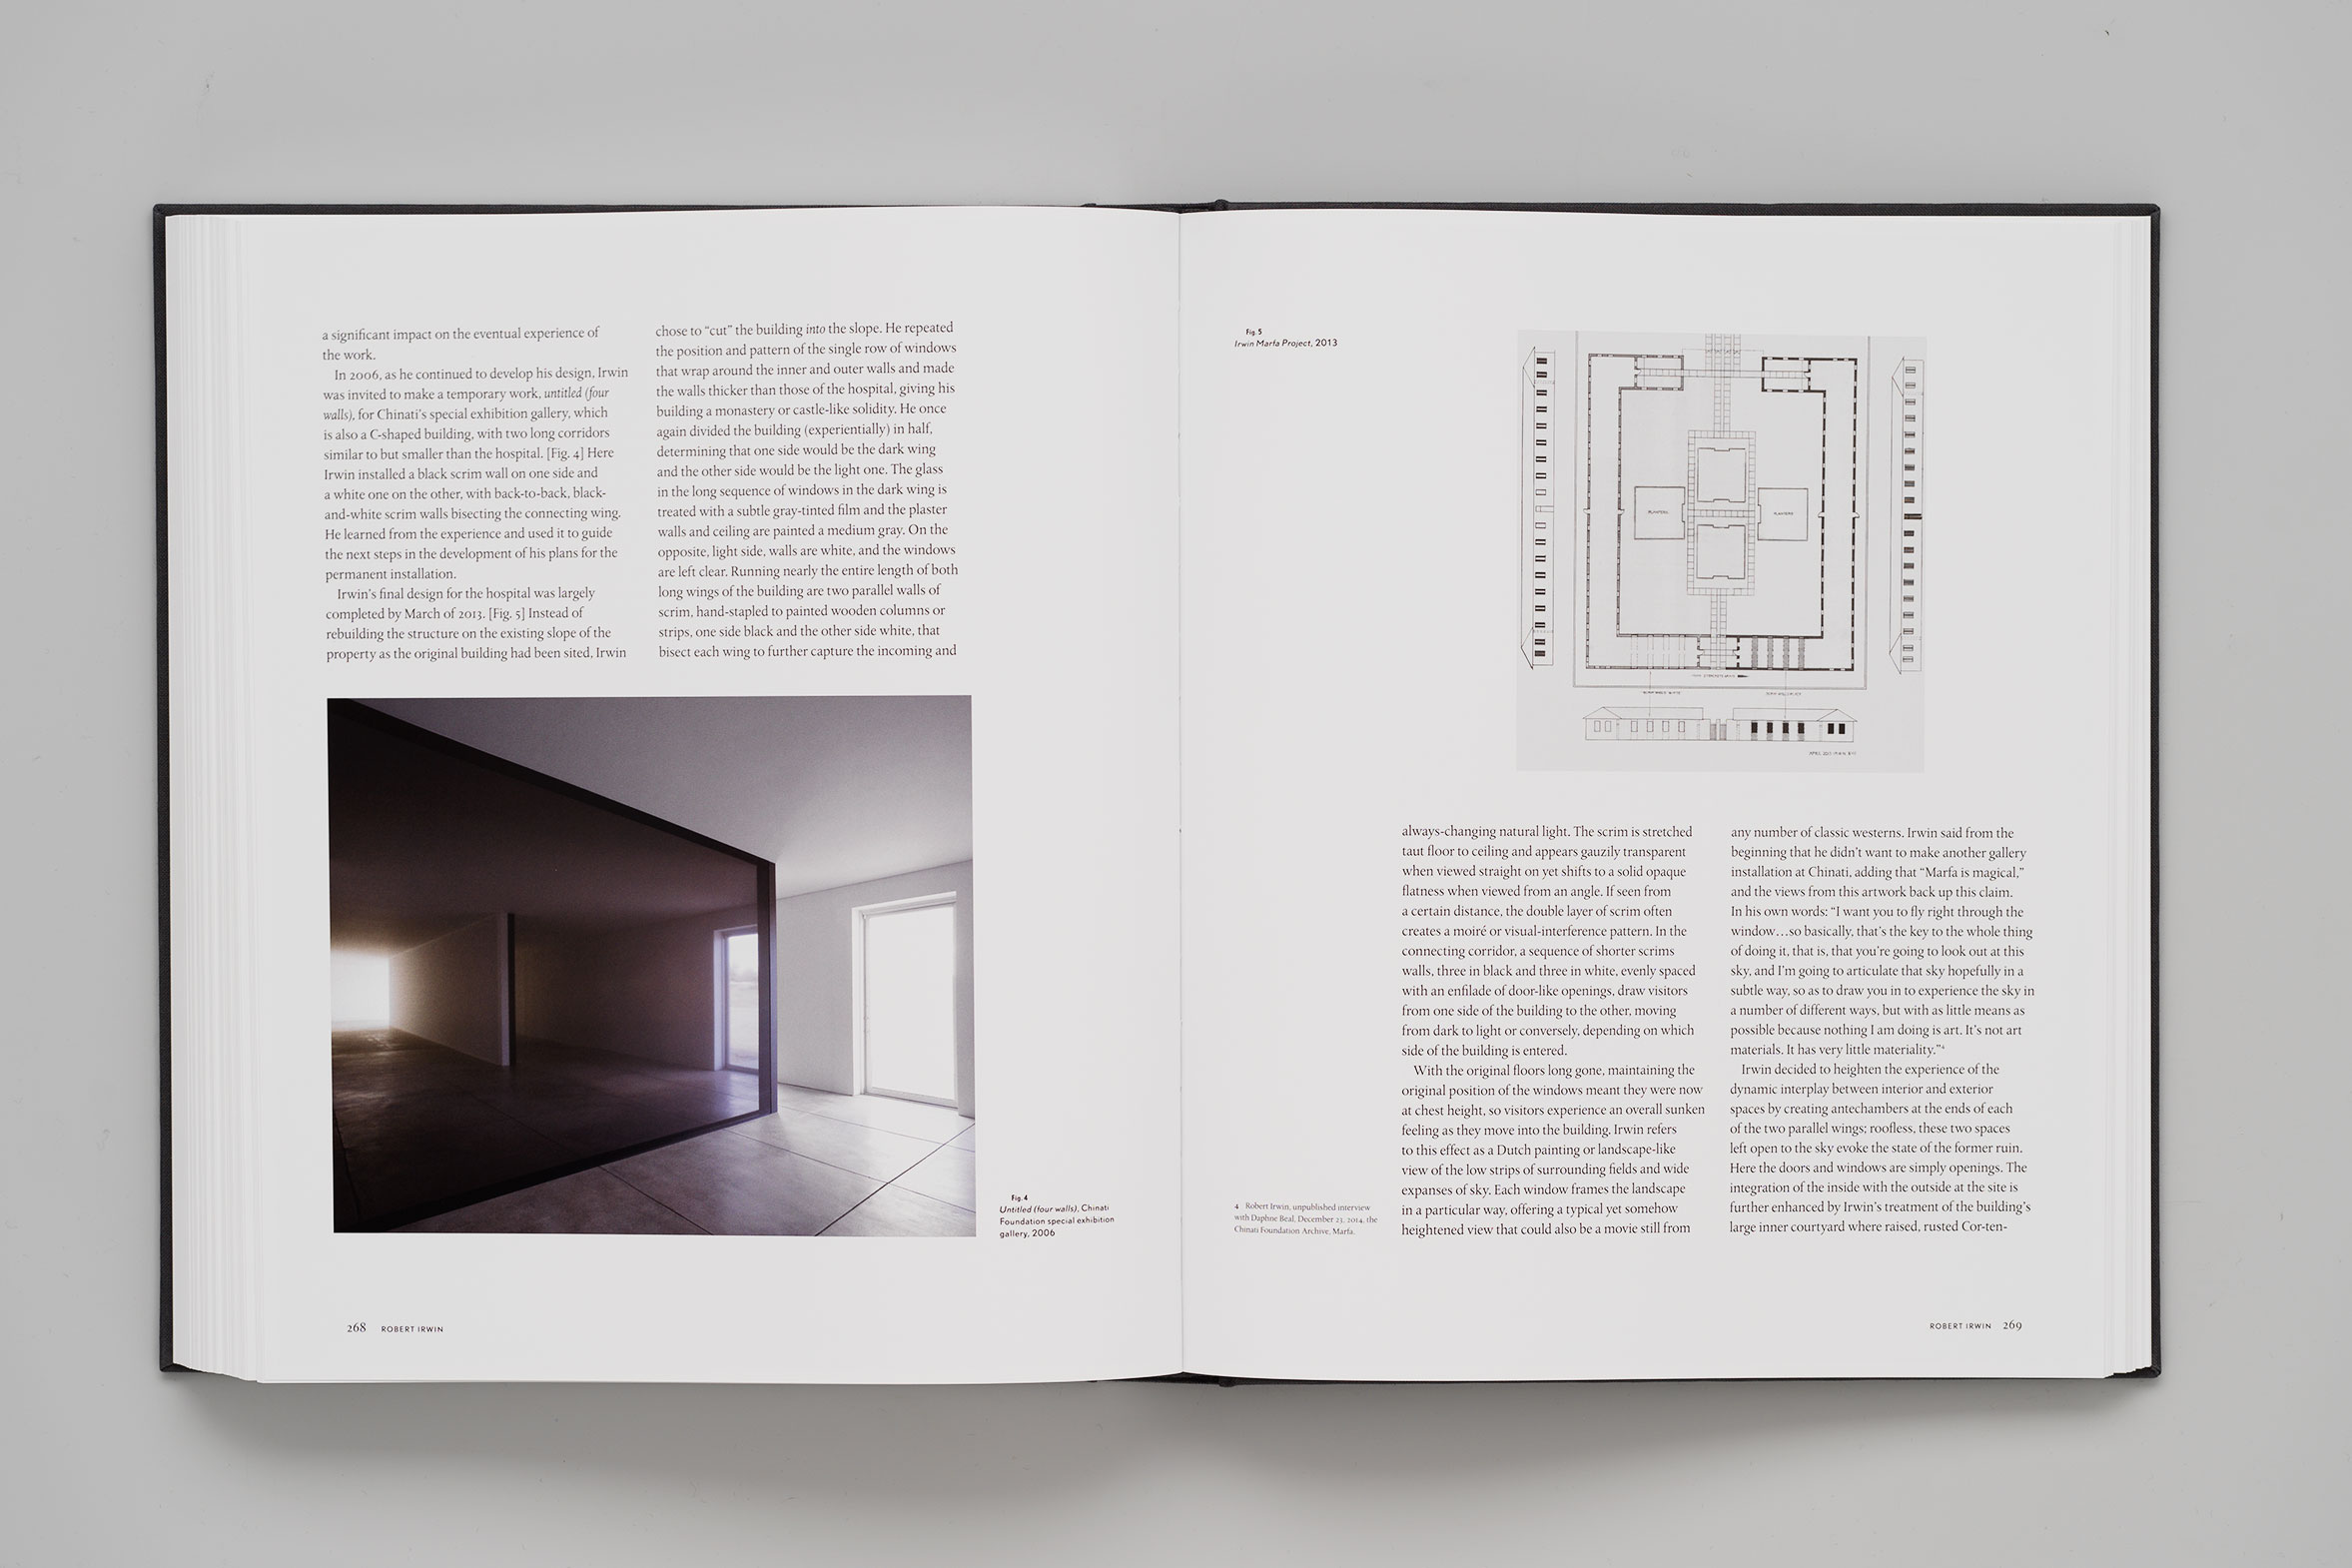 Chinati: The Vision of Donald Judd, Second Edition